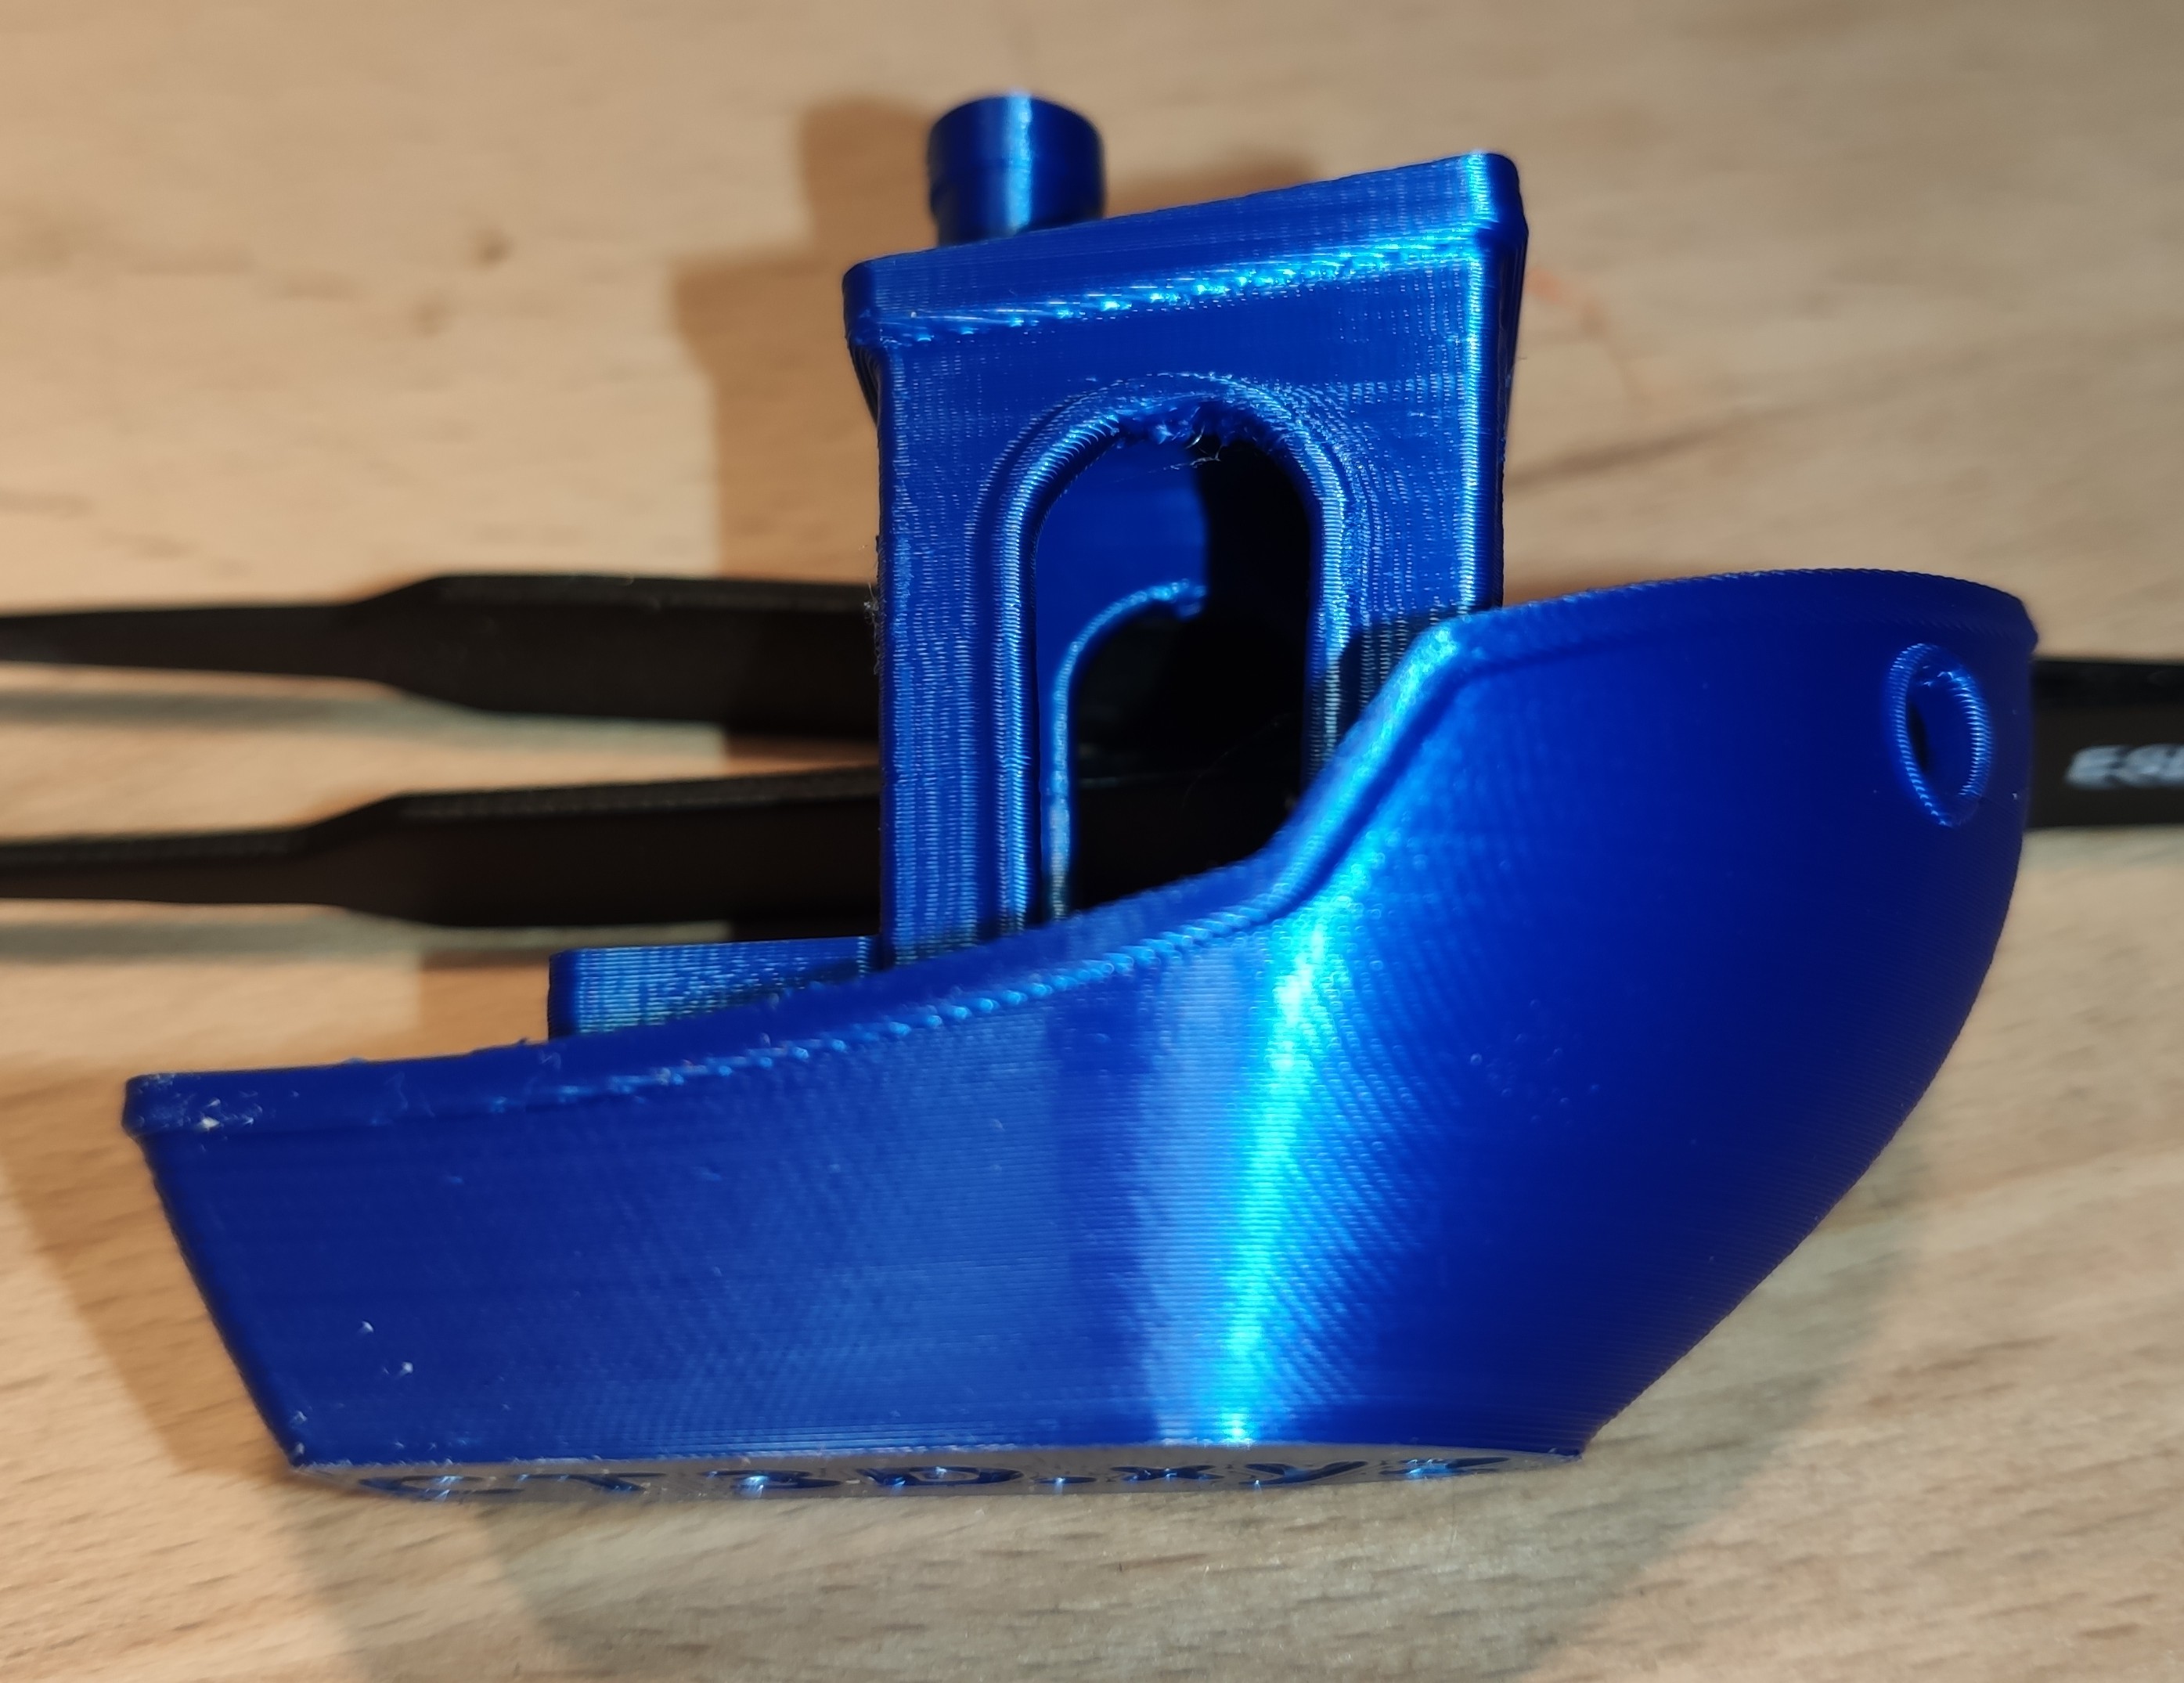 How to 3D Benchy right? – How do print this? (Printing help) – Prusa3D Forum